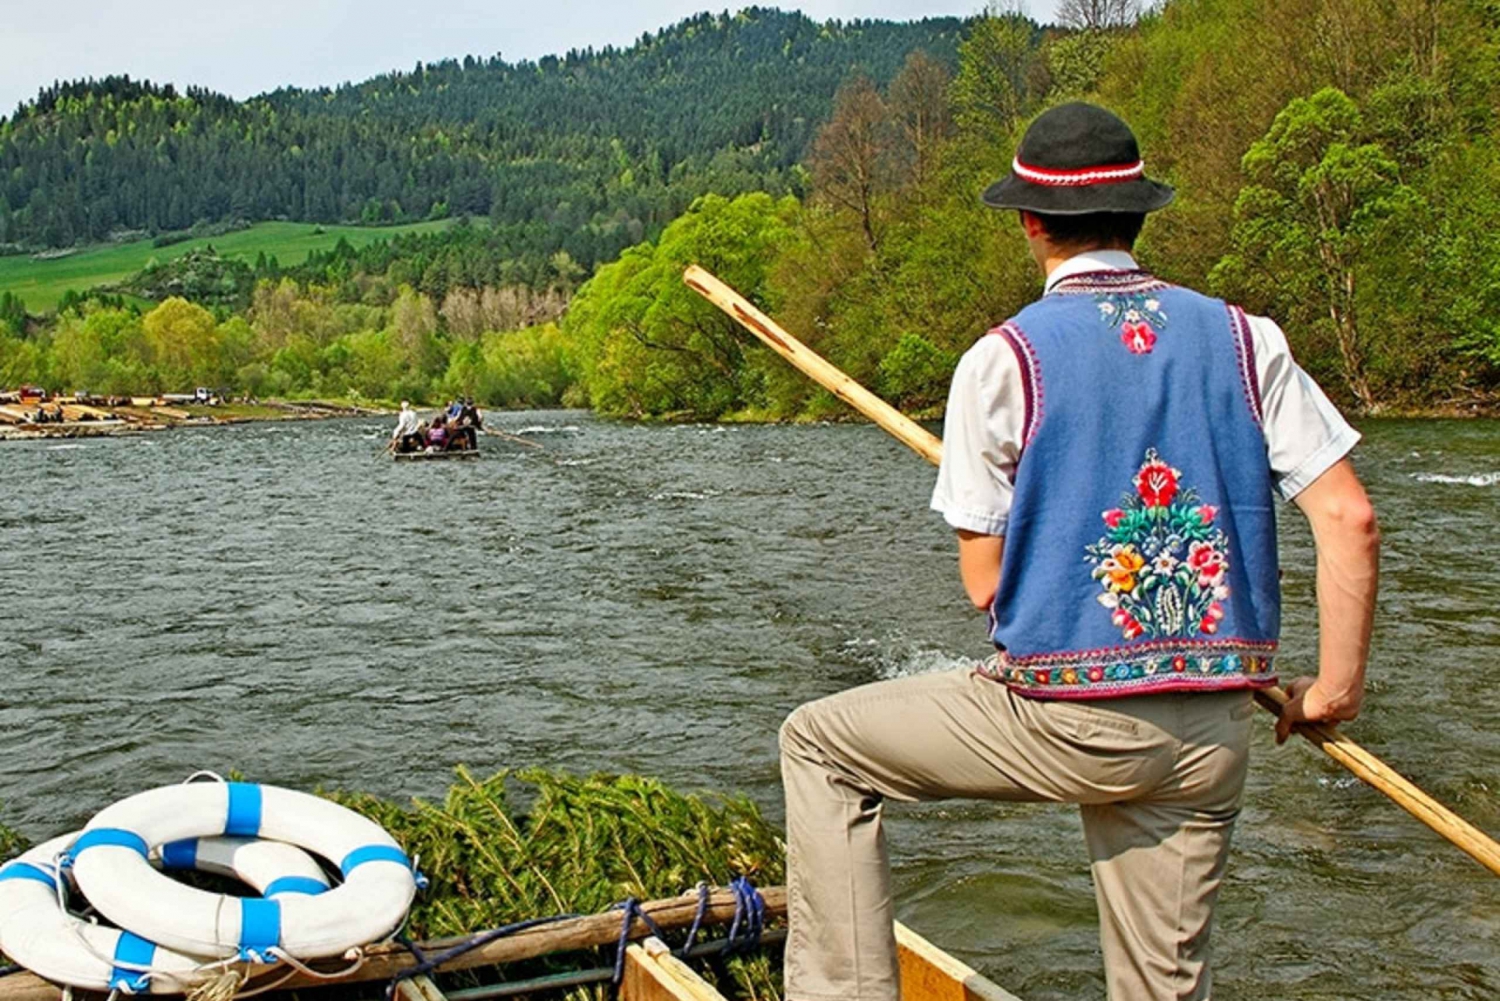 Dunajec River Rafting - Private Tour from Krakow